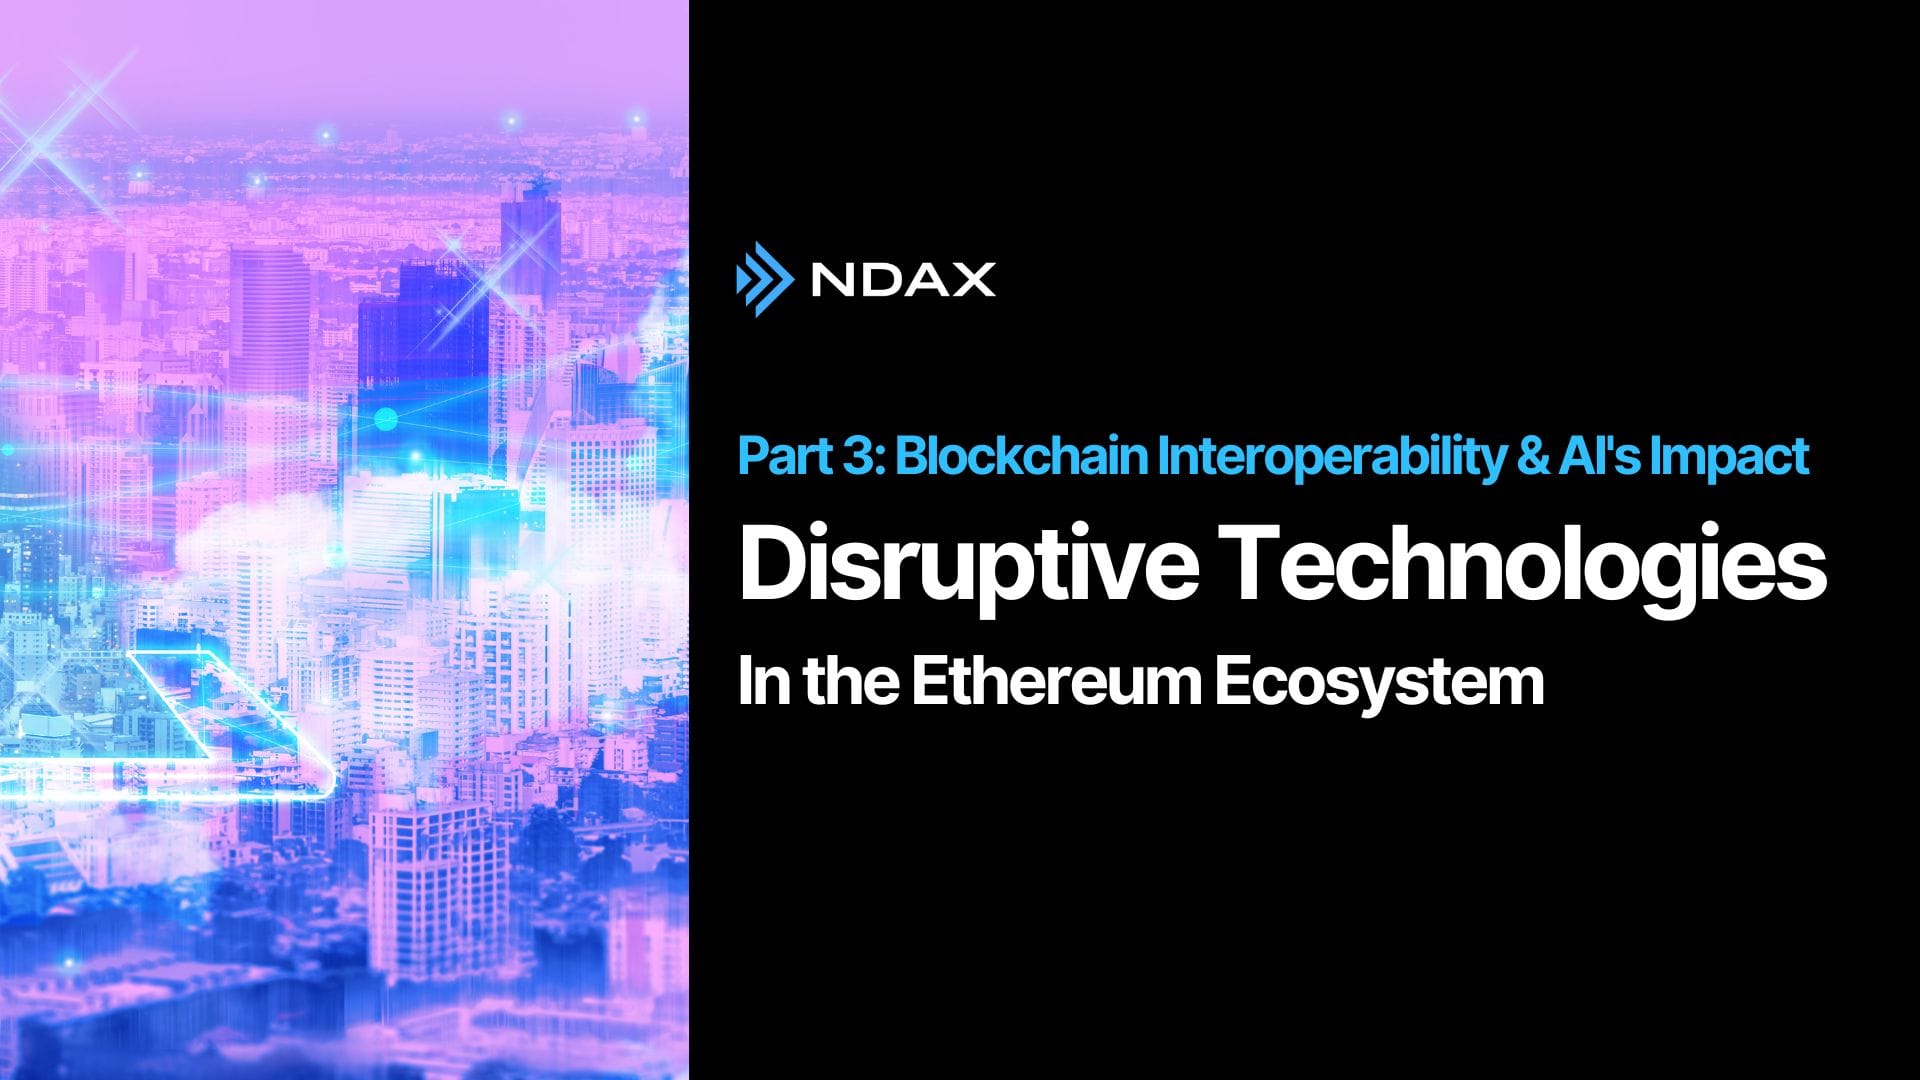 The Most Disruptive Technologies in the Ethereum Ecosystem - Part 3